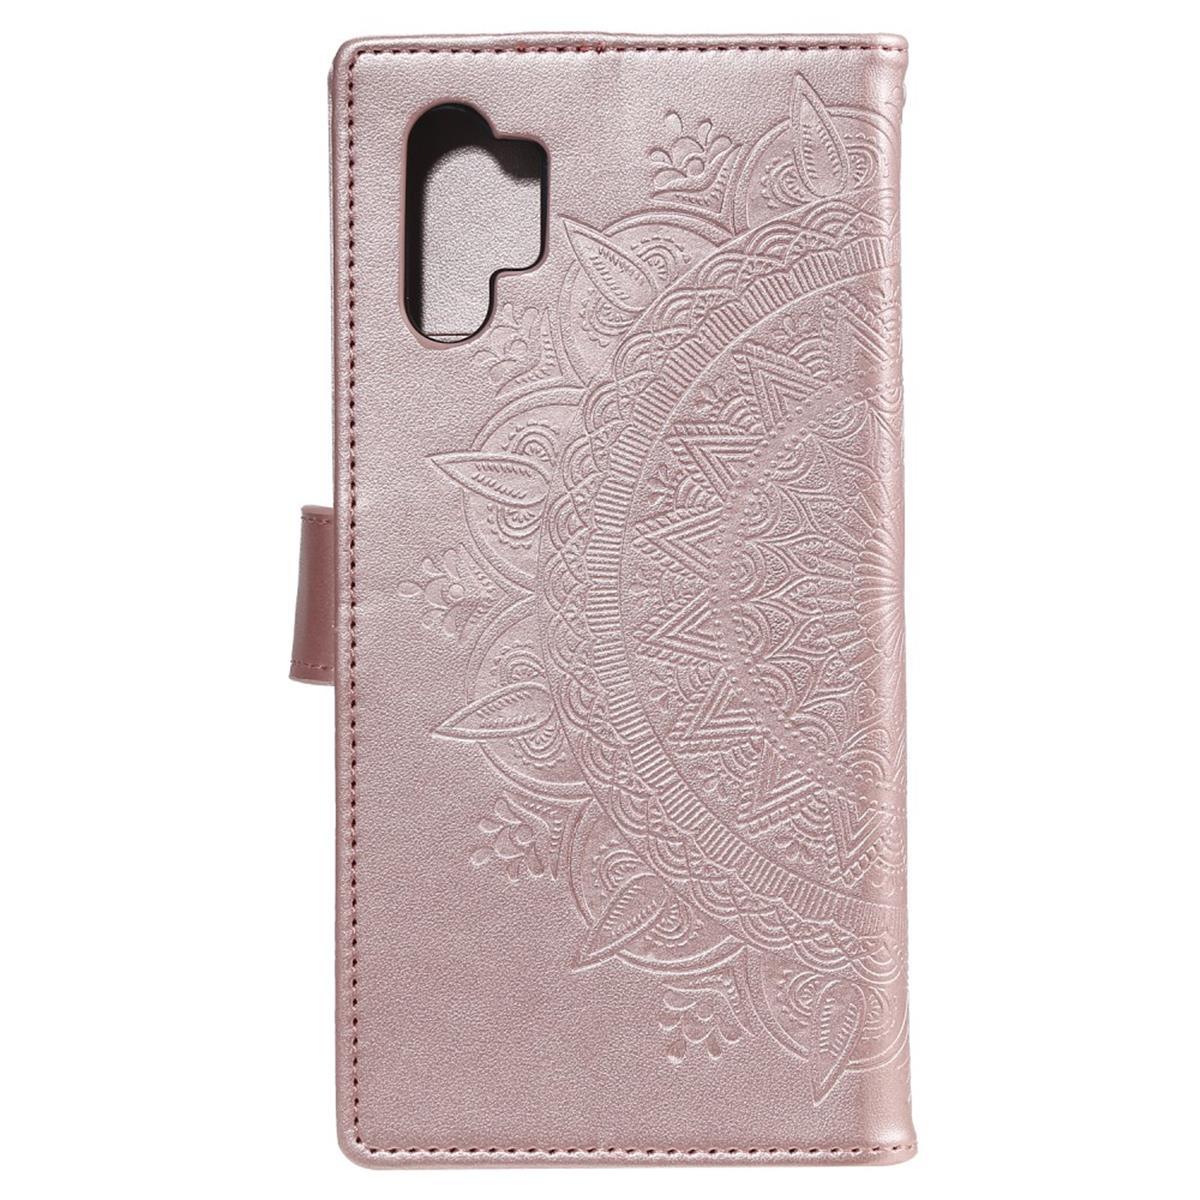 Klapphülle Roségold Mandala COVERKINGZ mit Samsung, 4G, Galaxy Muster, A32 Bookcover,